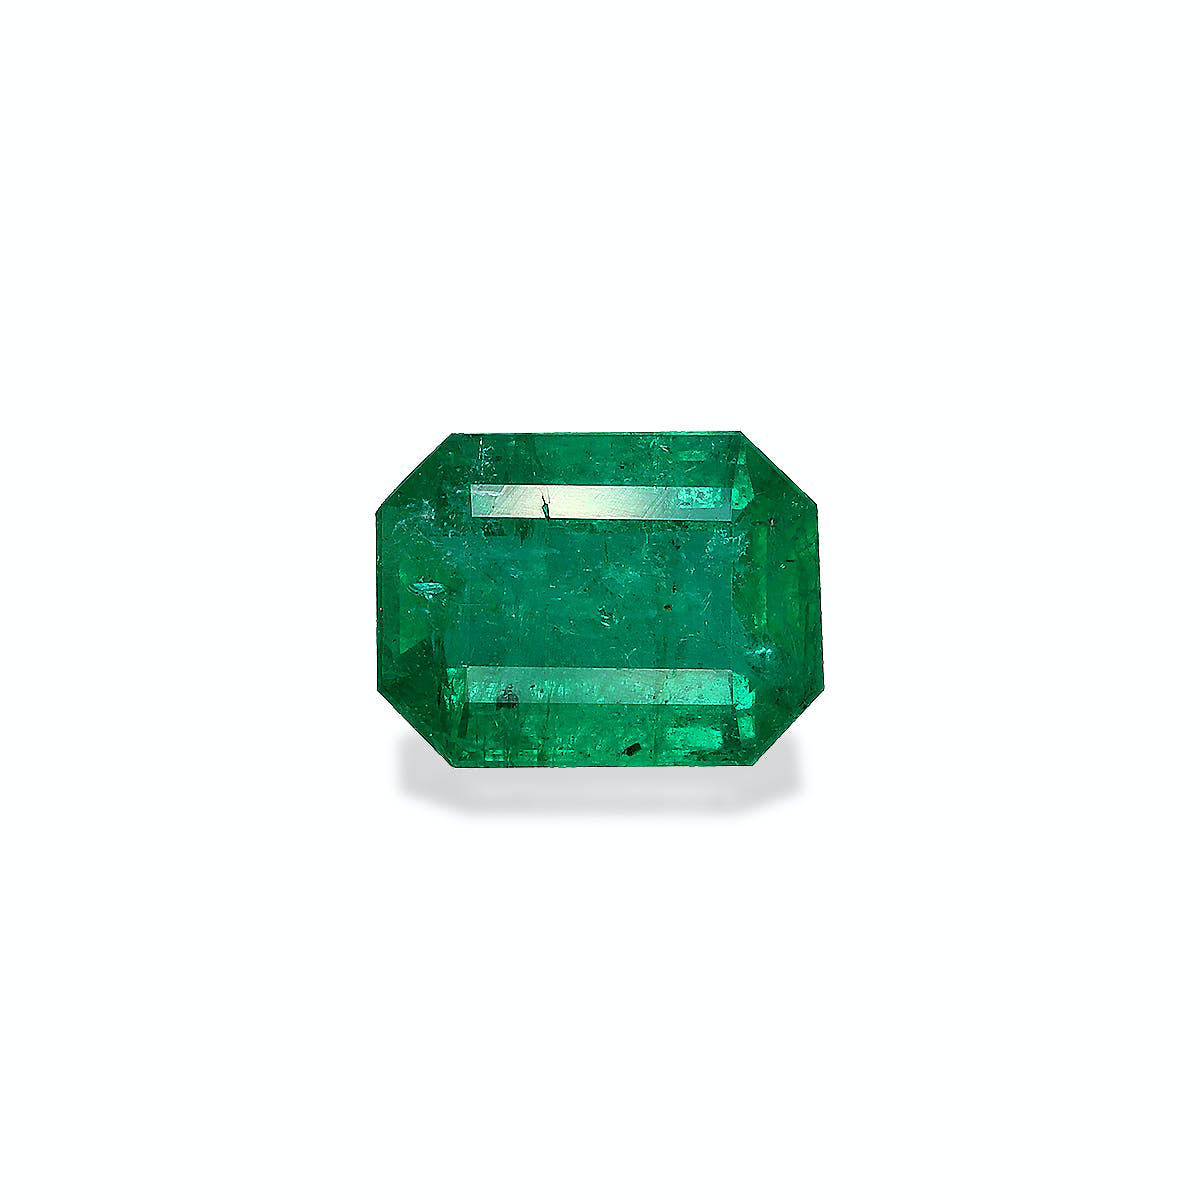 Picture of Green Zambian Emerald 1.92ct (PG0345)